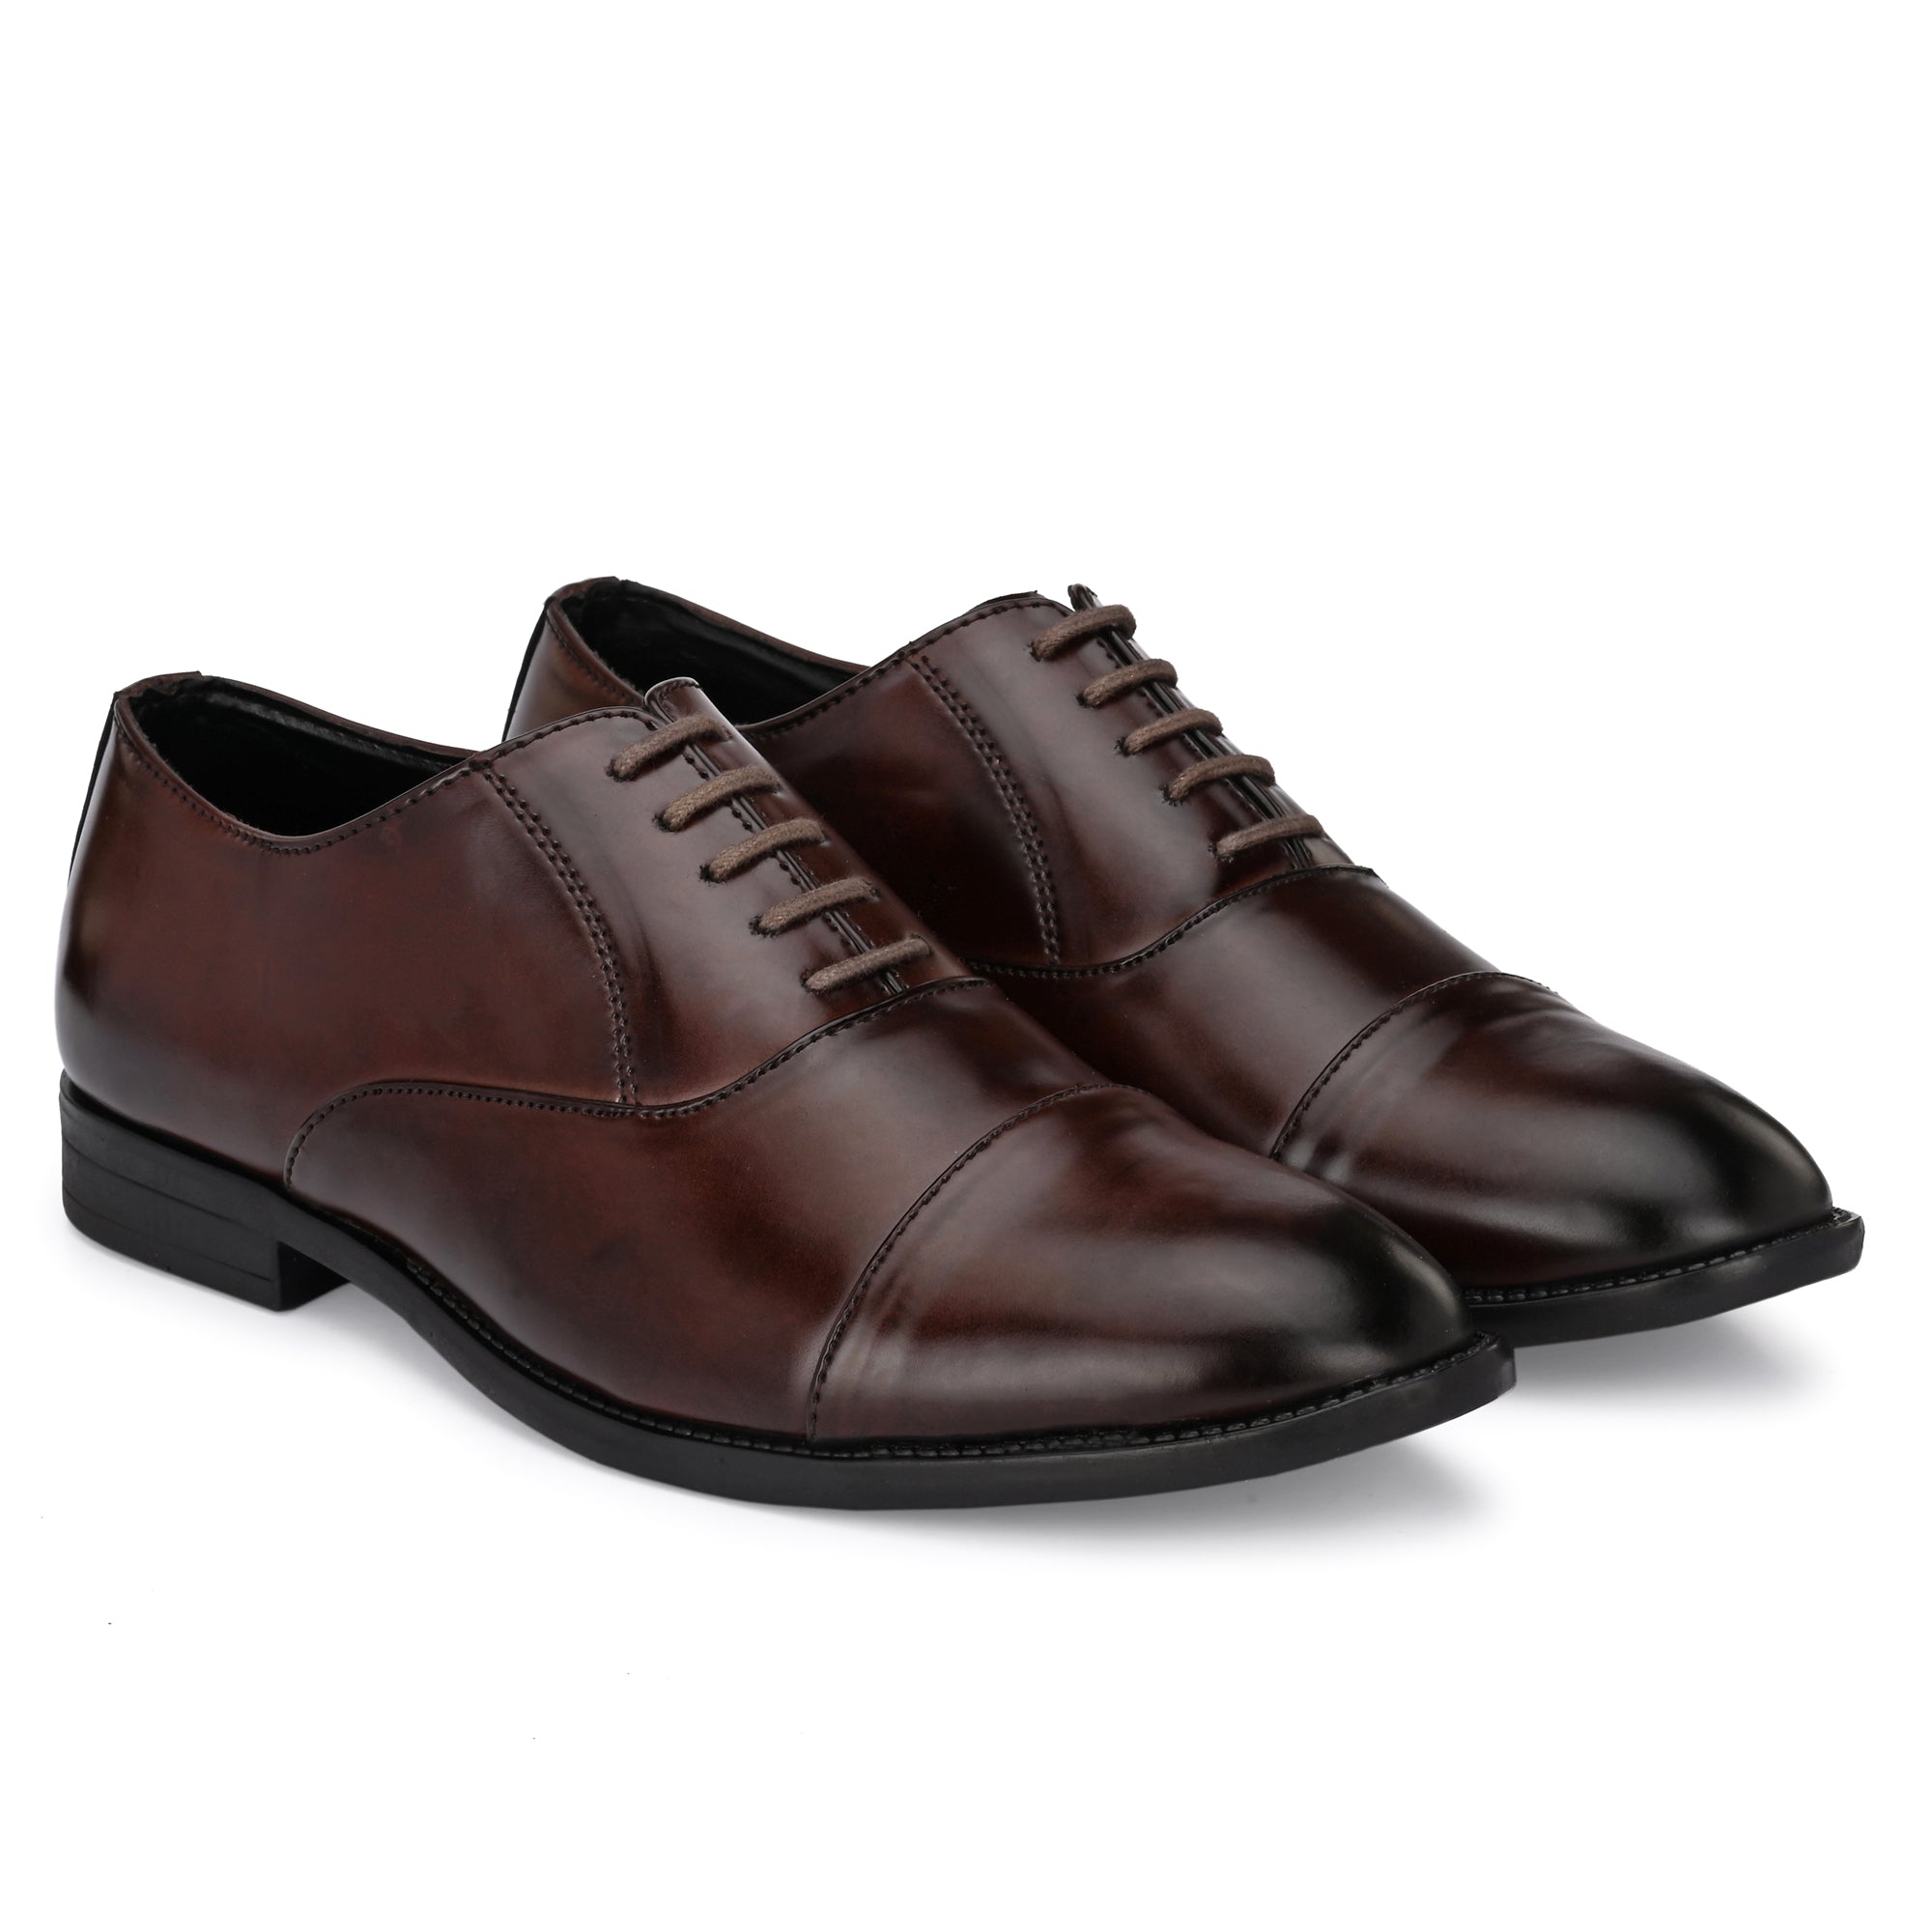 Attitudist Handcrafted Oxford Brown Plain Formal Laceup Derby Shoes With Cap Toe For Men MTOBSF